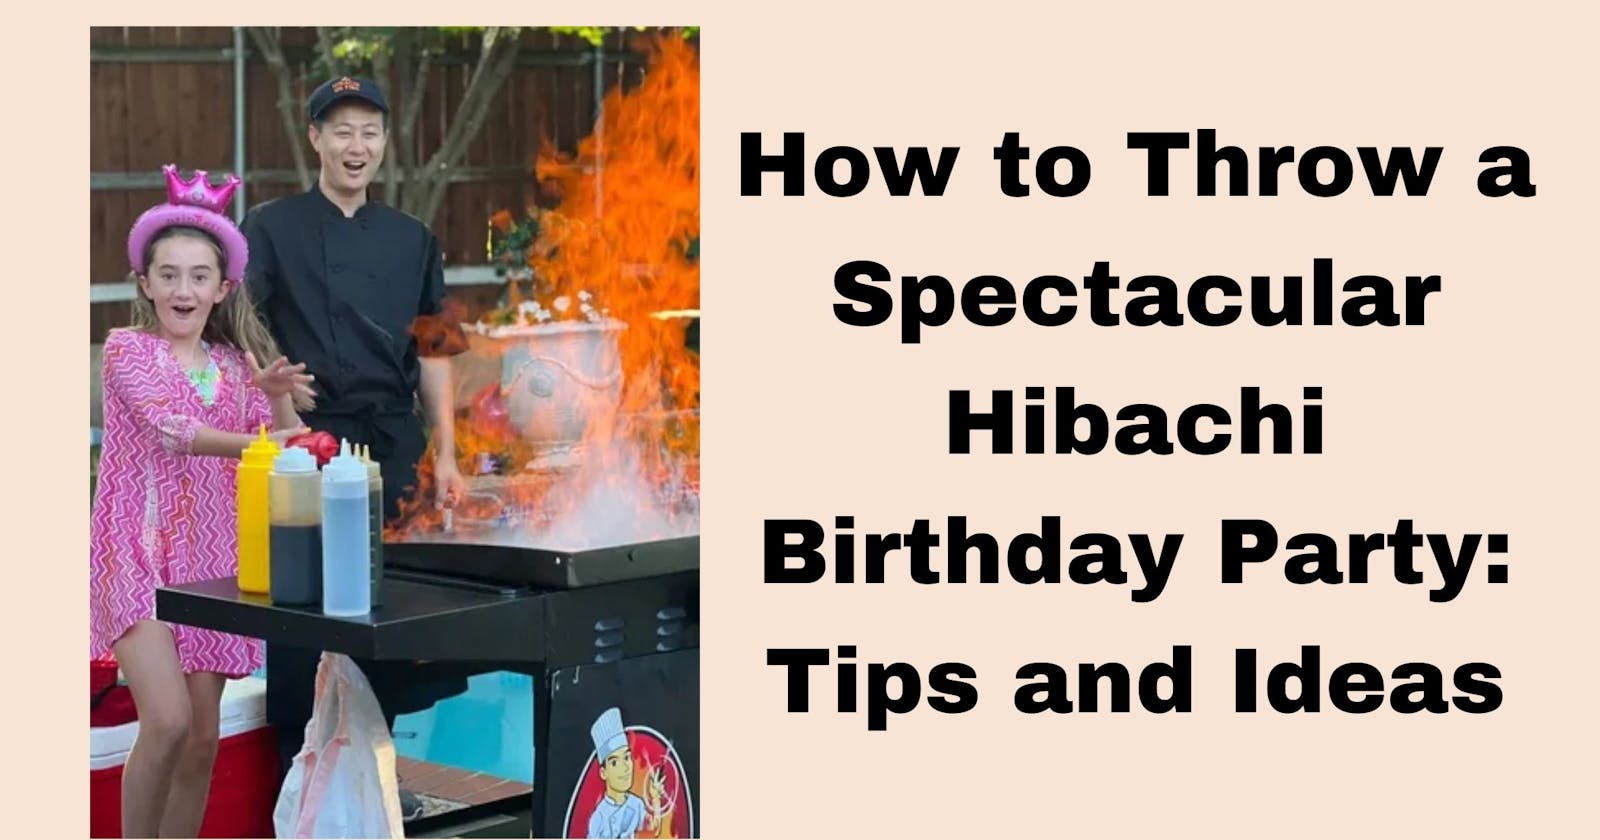 How to Throw a Spectacular Hibachi Birthday Party: Tips and Ideas